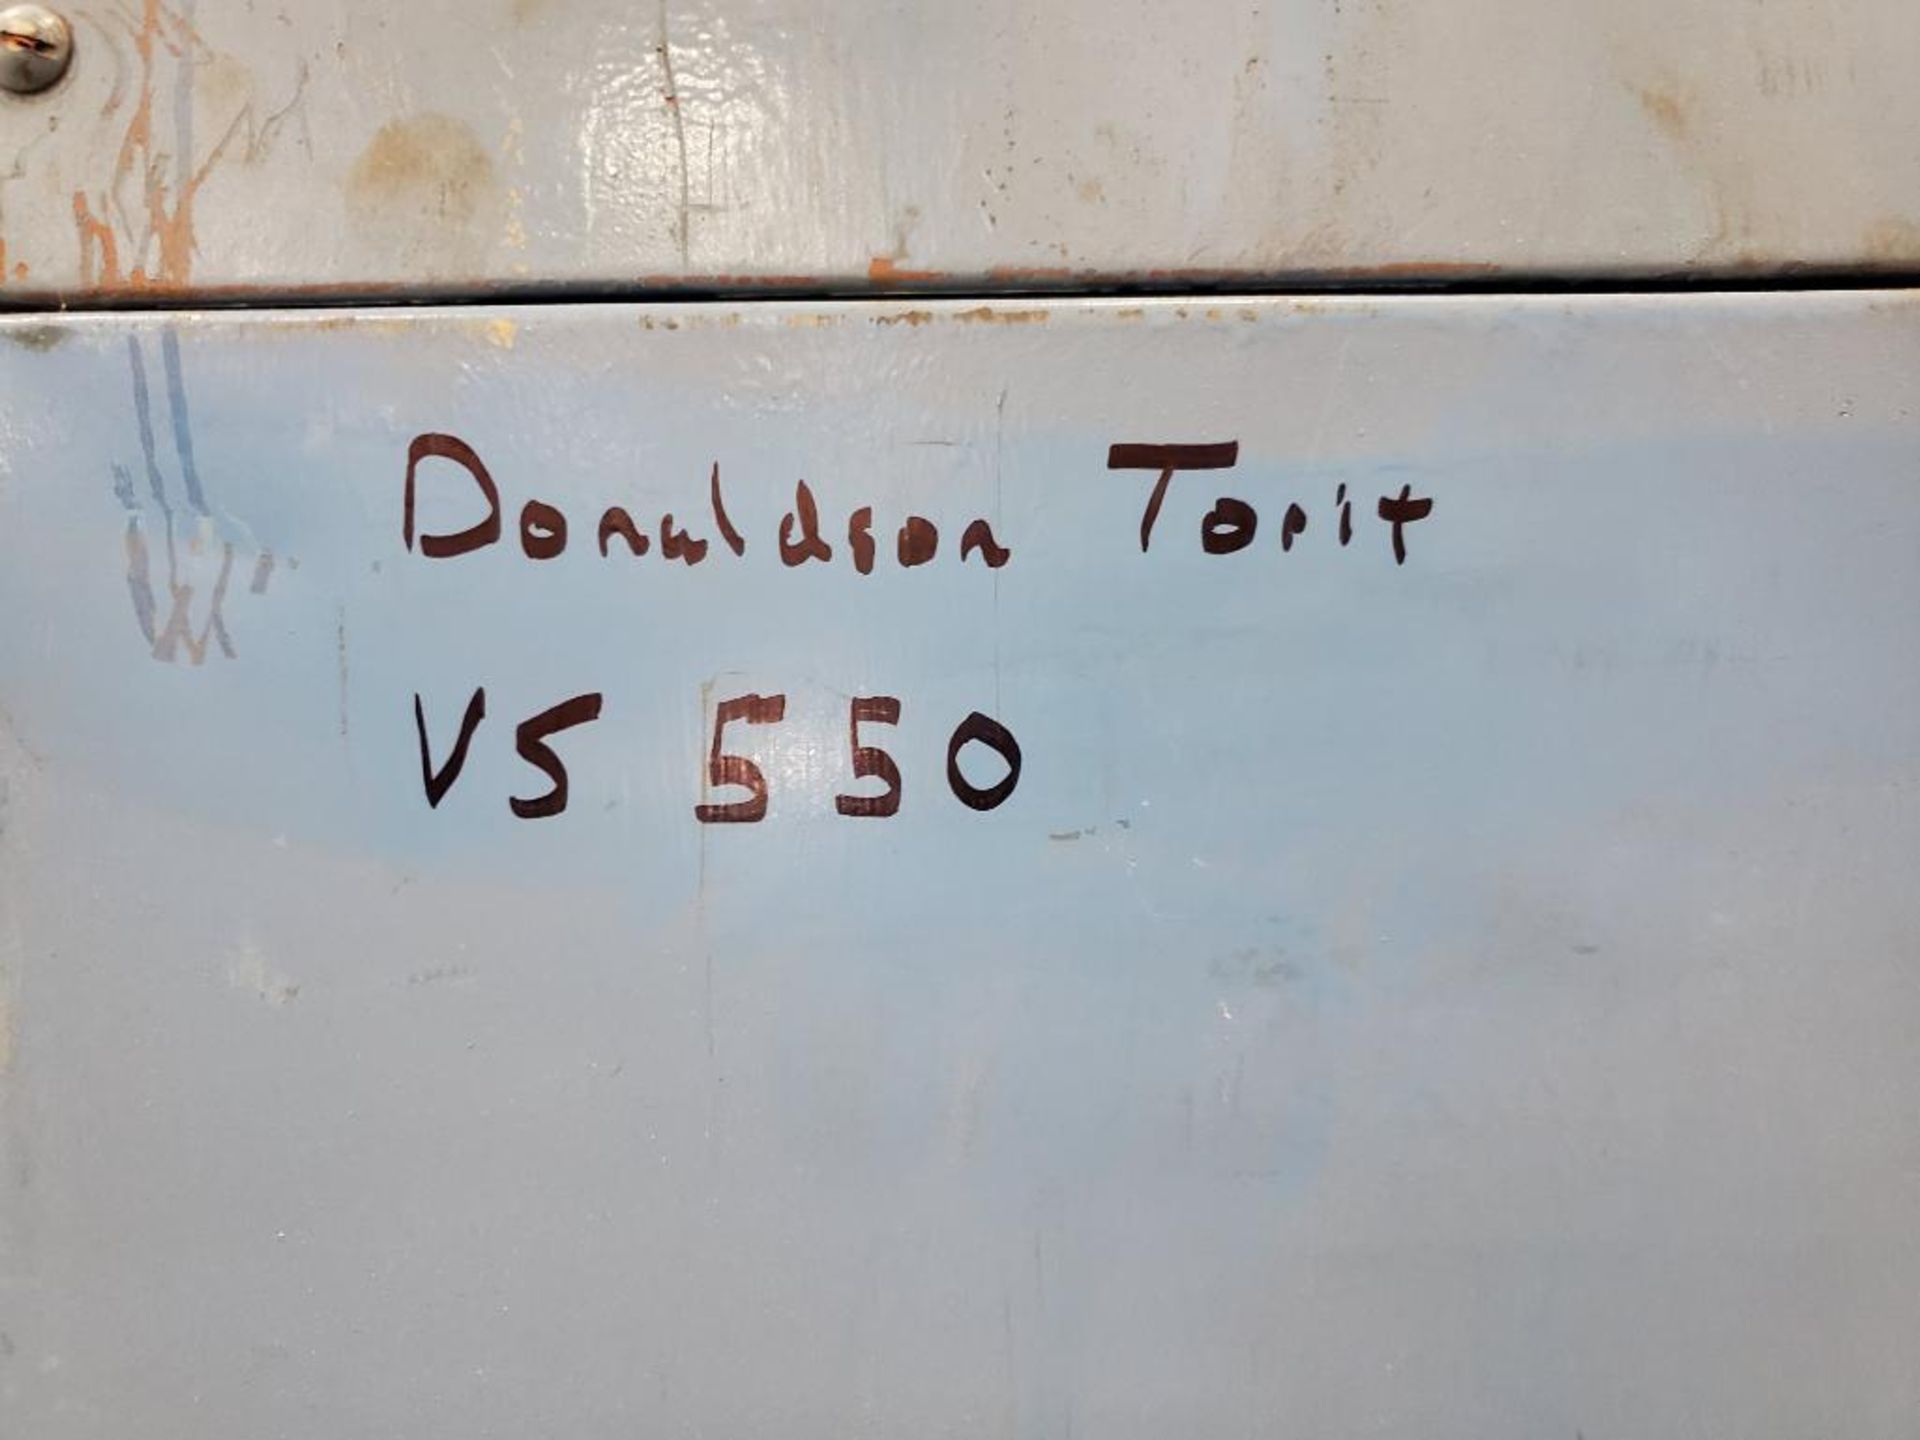 Donaldson Torit VS 550 Down Draft Dust Collector, Refurbished 4/21/21 - Image 6 of 6